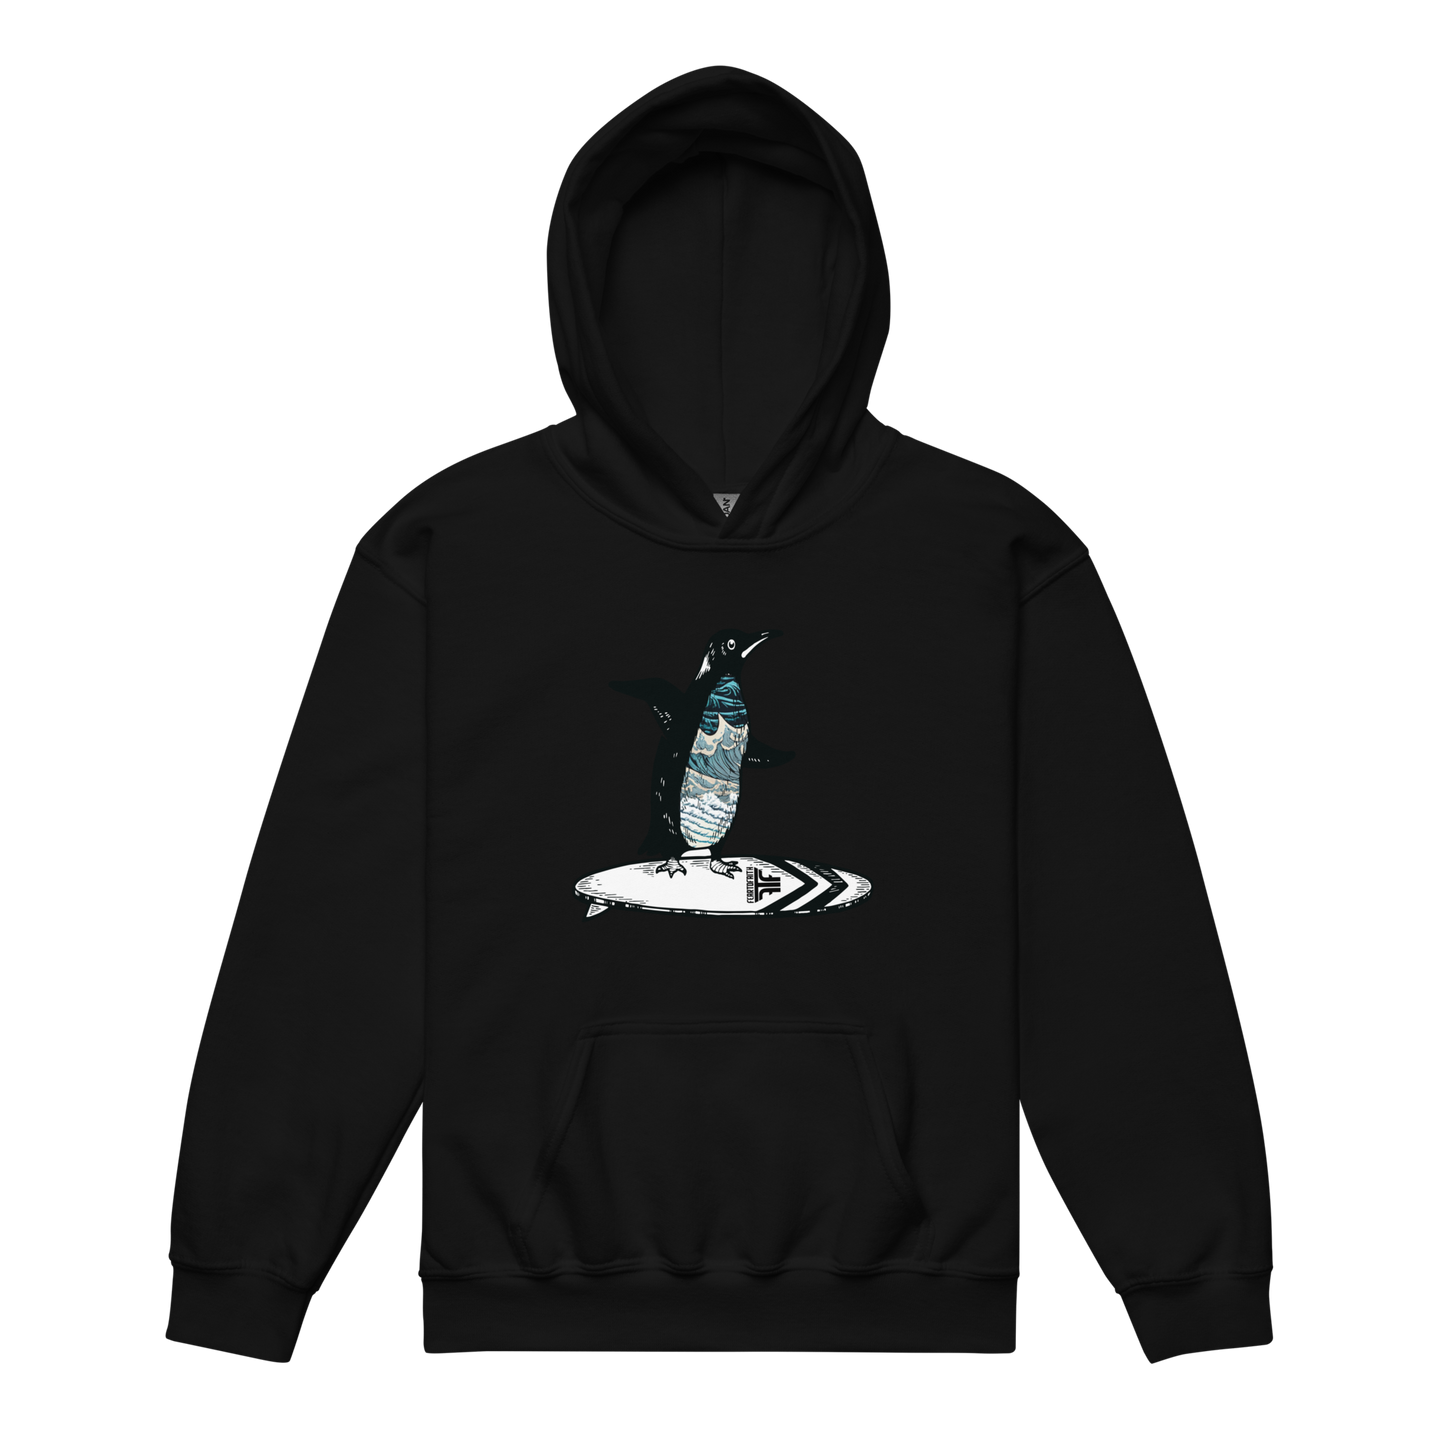 FTF PENGUIN - YOUTH heavy blend hoodie